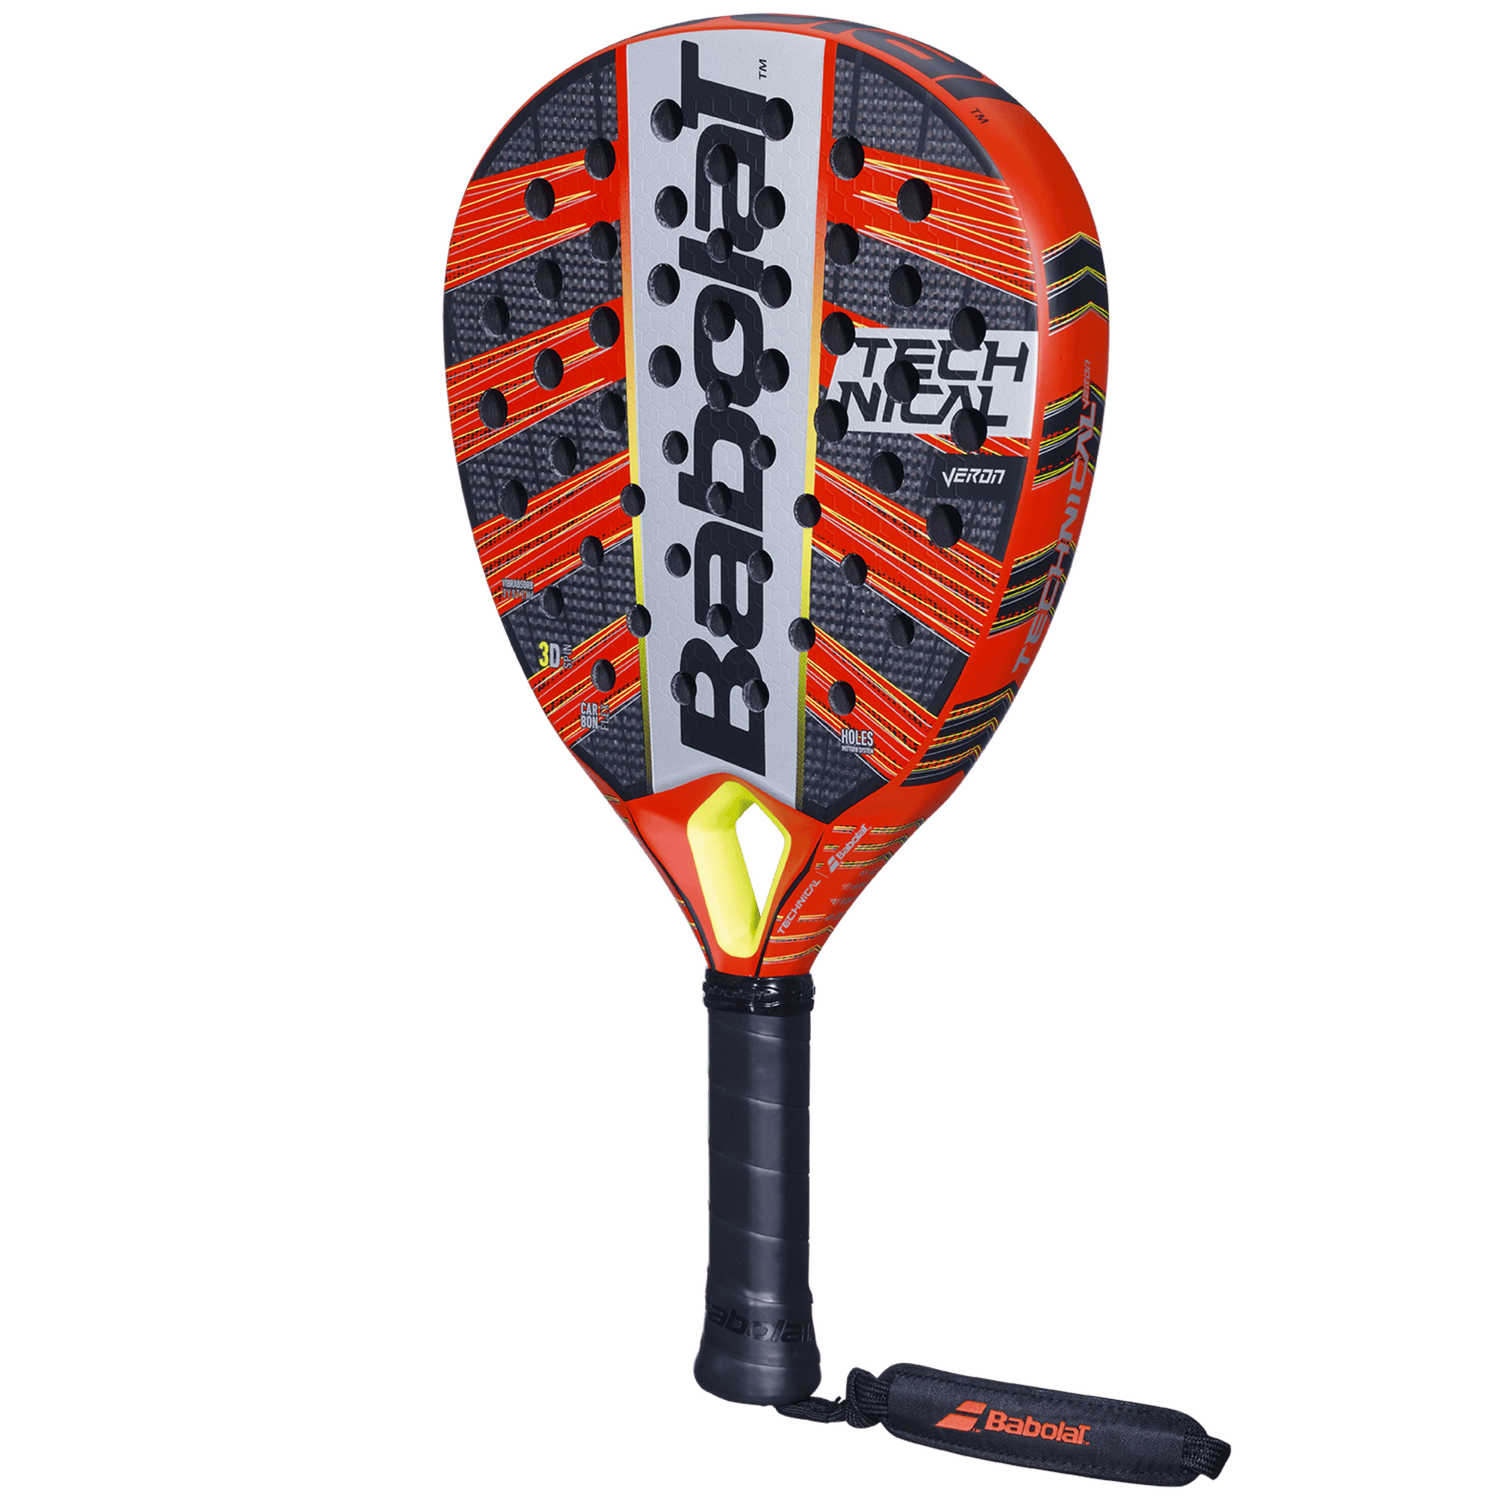 A padel racket for technical strikers.